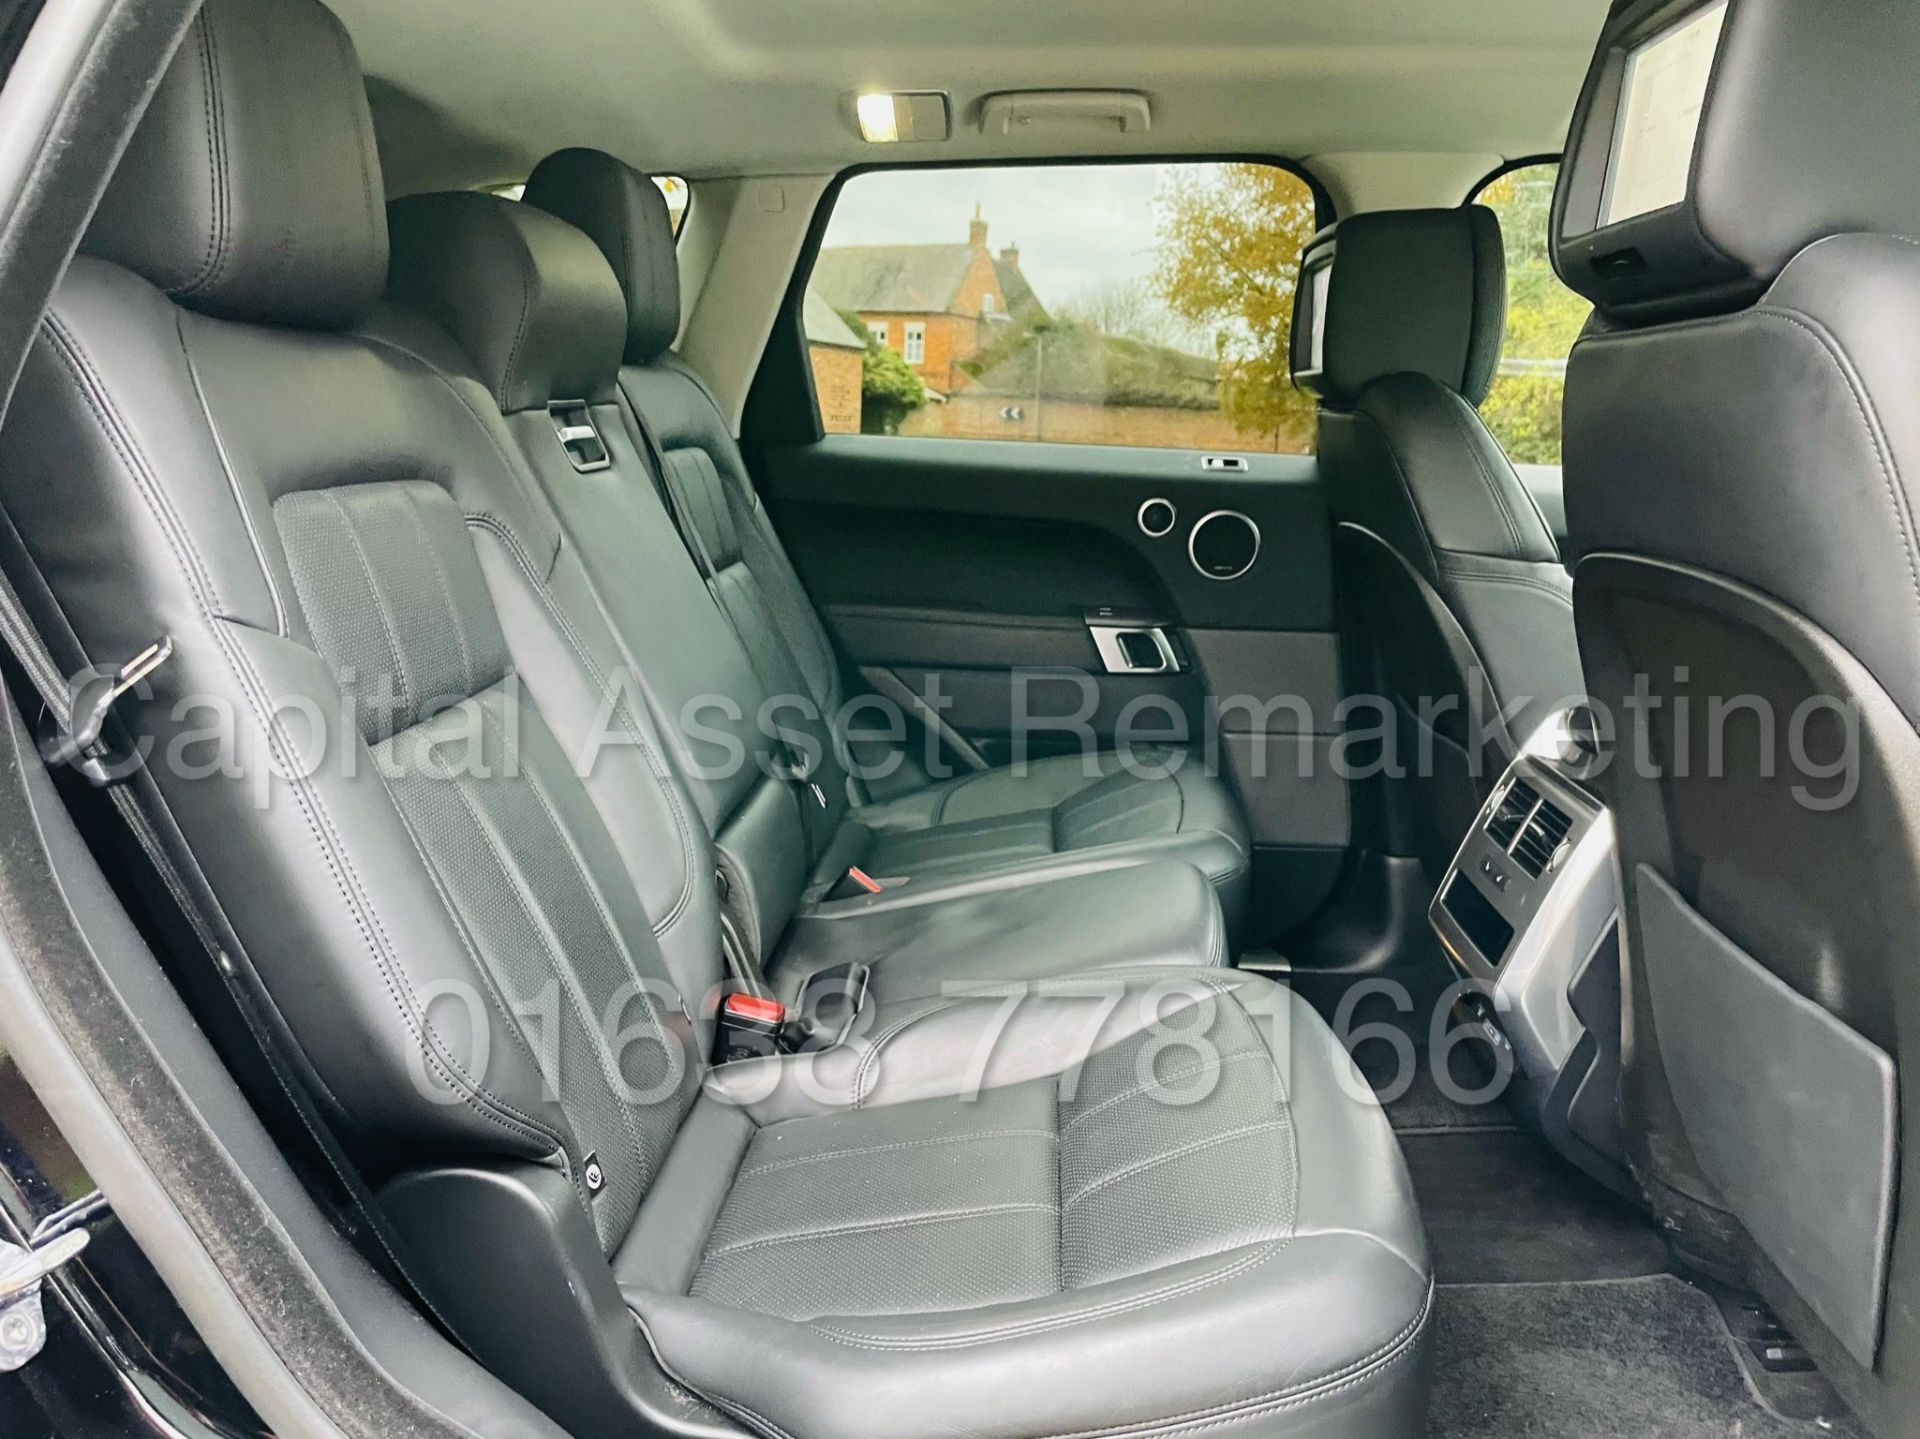 RANGE ROVER SPORT *HSE EDITION* SUV (2019 MODEL) '3.0 SDV6 - 306 BHP - 8 SPEED AUTO' *FULLY LOADED* - Image 32 of 56